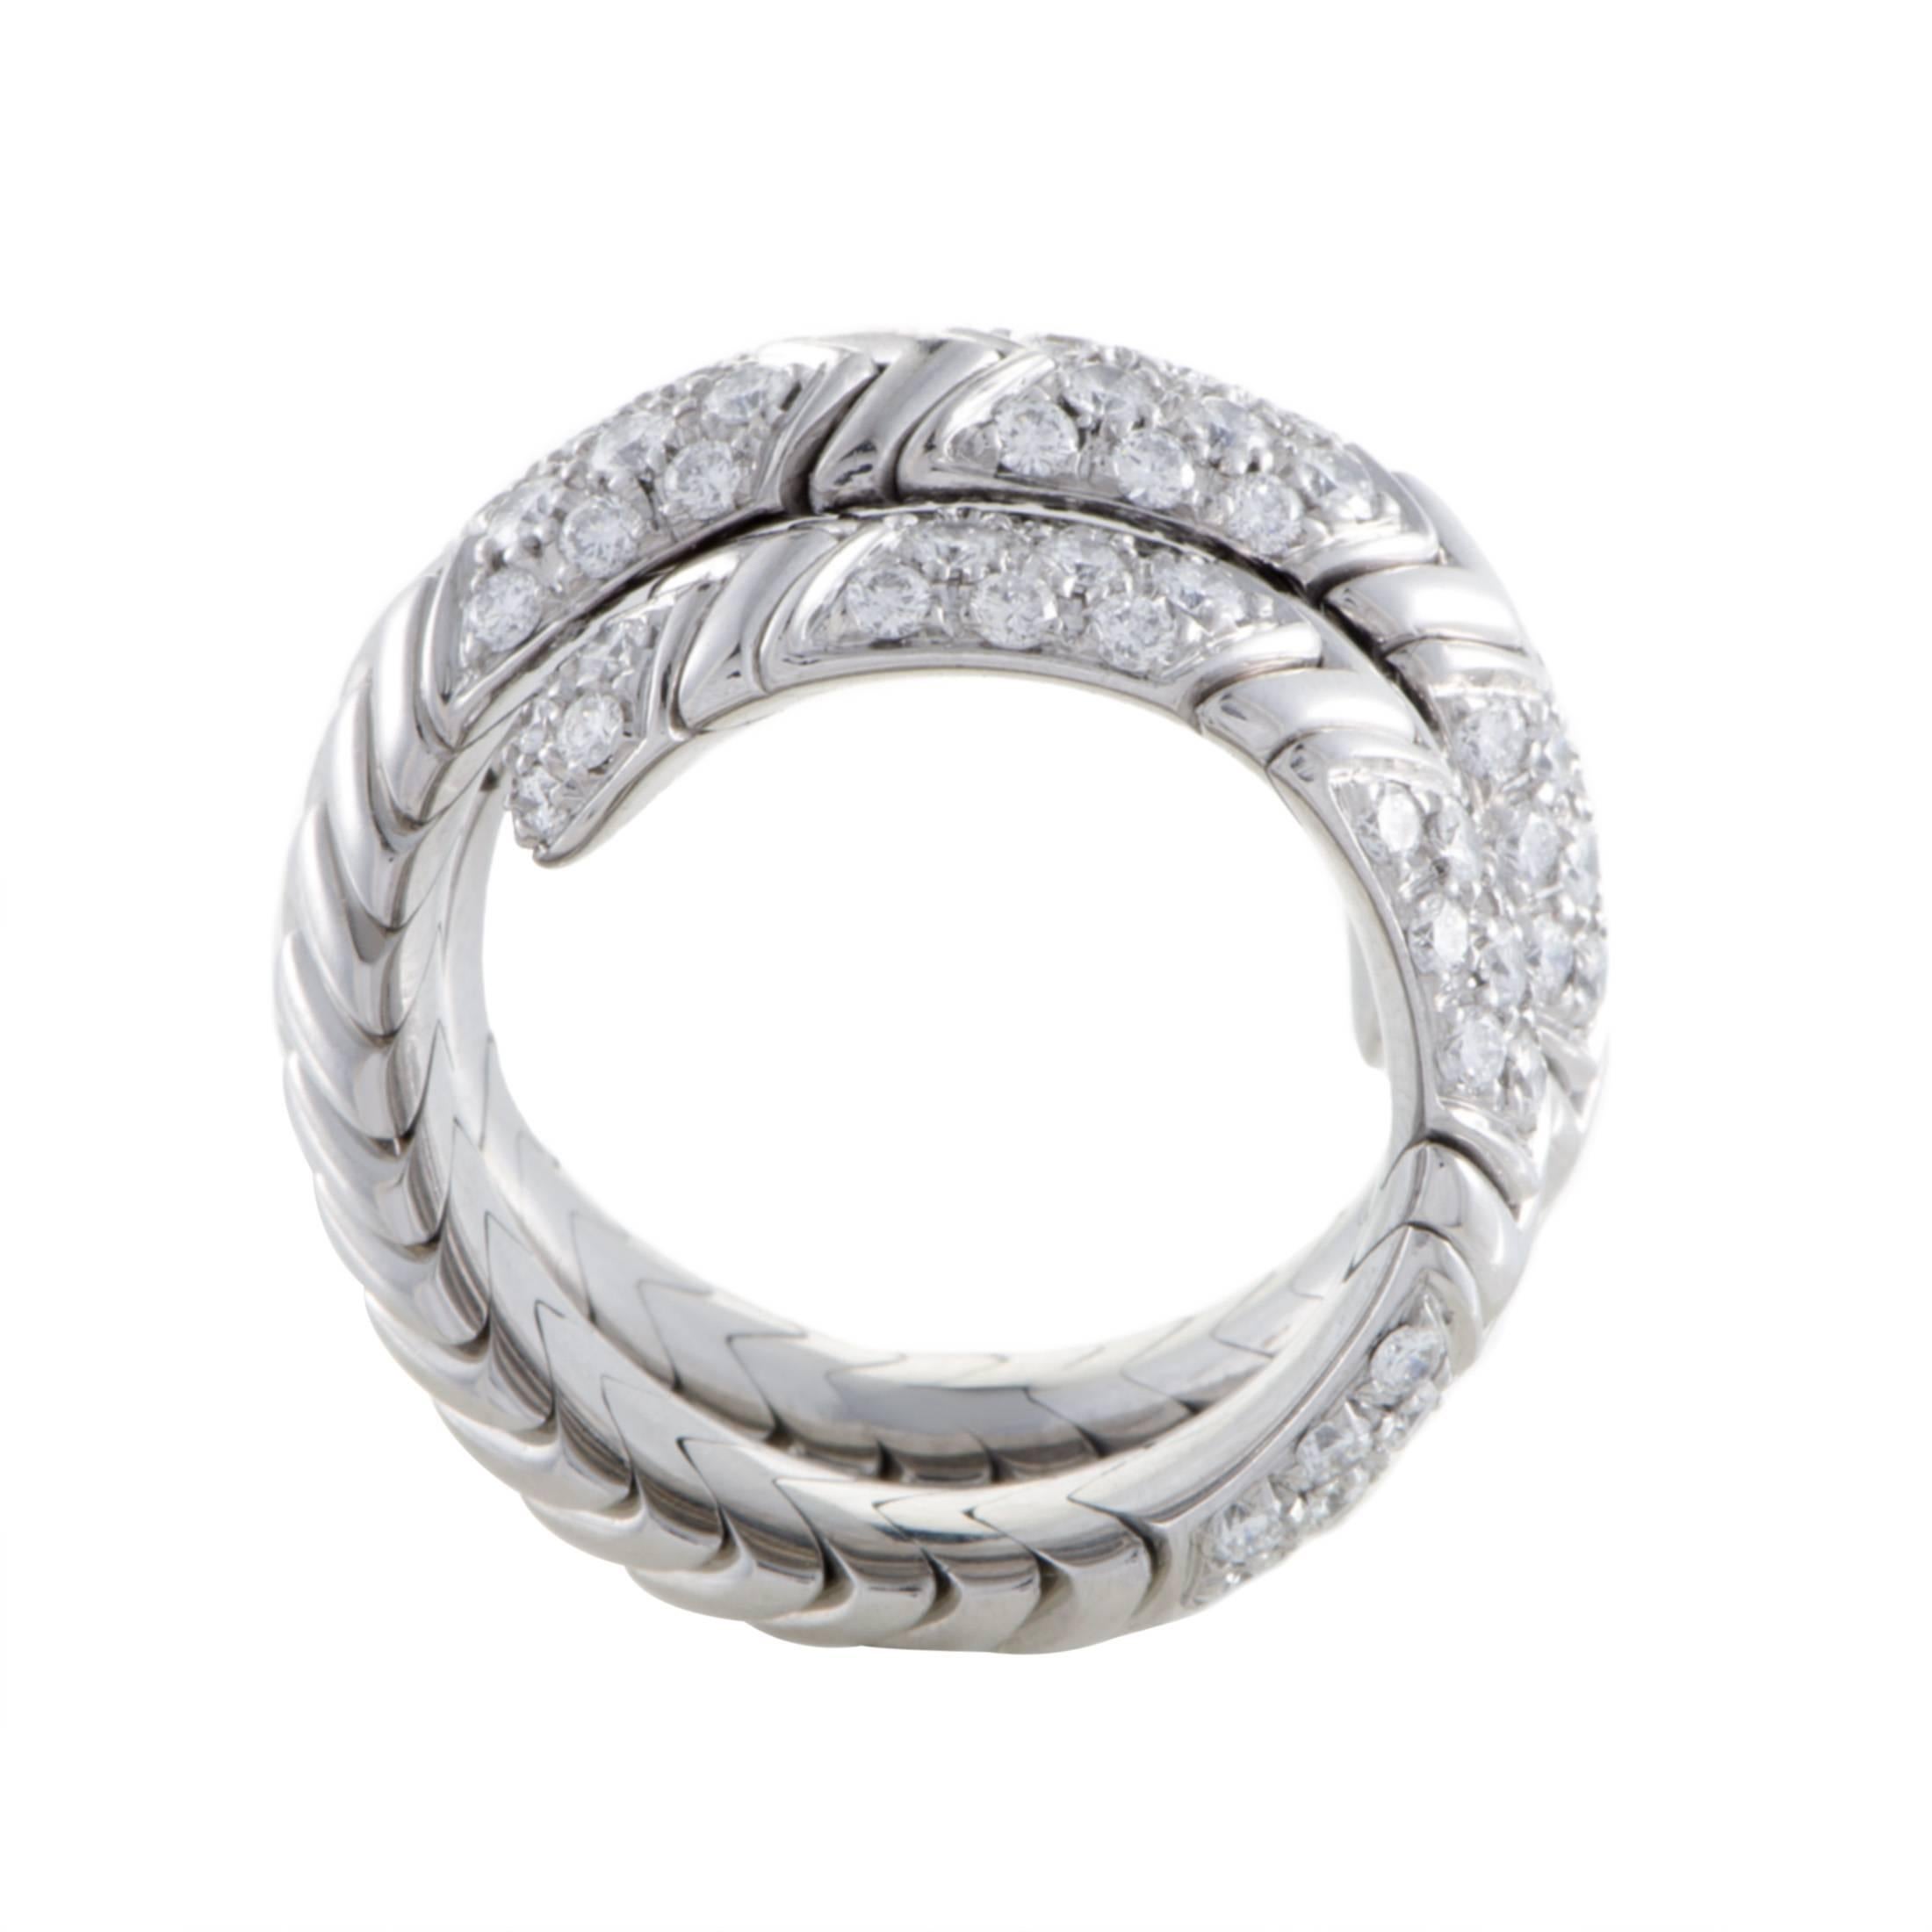 Boasting the brand's instantly recognizable pattern crafted in expertly polished 18K white gold, this wonderful ring from Bulgari is embellished with a scintillating arrangement of diamonds weighing in total 2.46 carats for a dazzling sight.
Ring